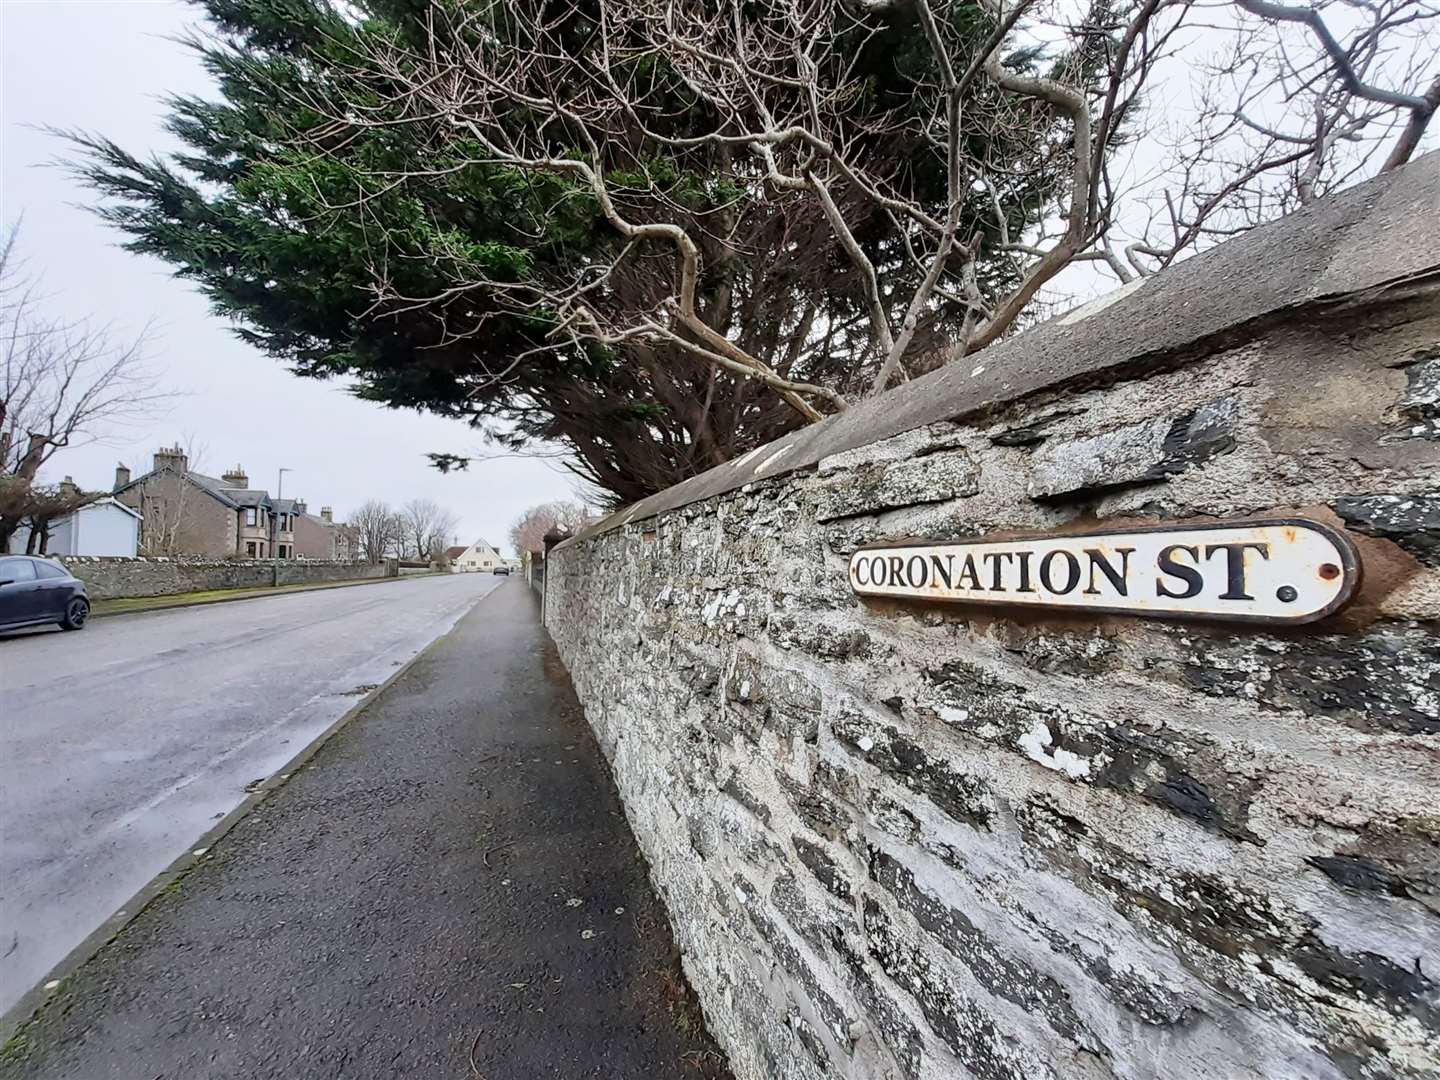 Coronation Street in Wick is rated as the most expensive street among eight KW postcode areas, based on sales over a five-year period.